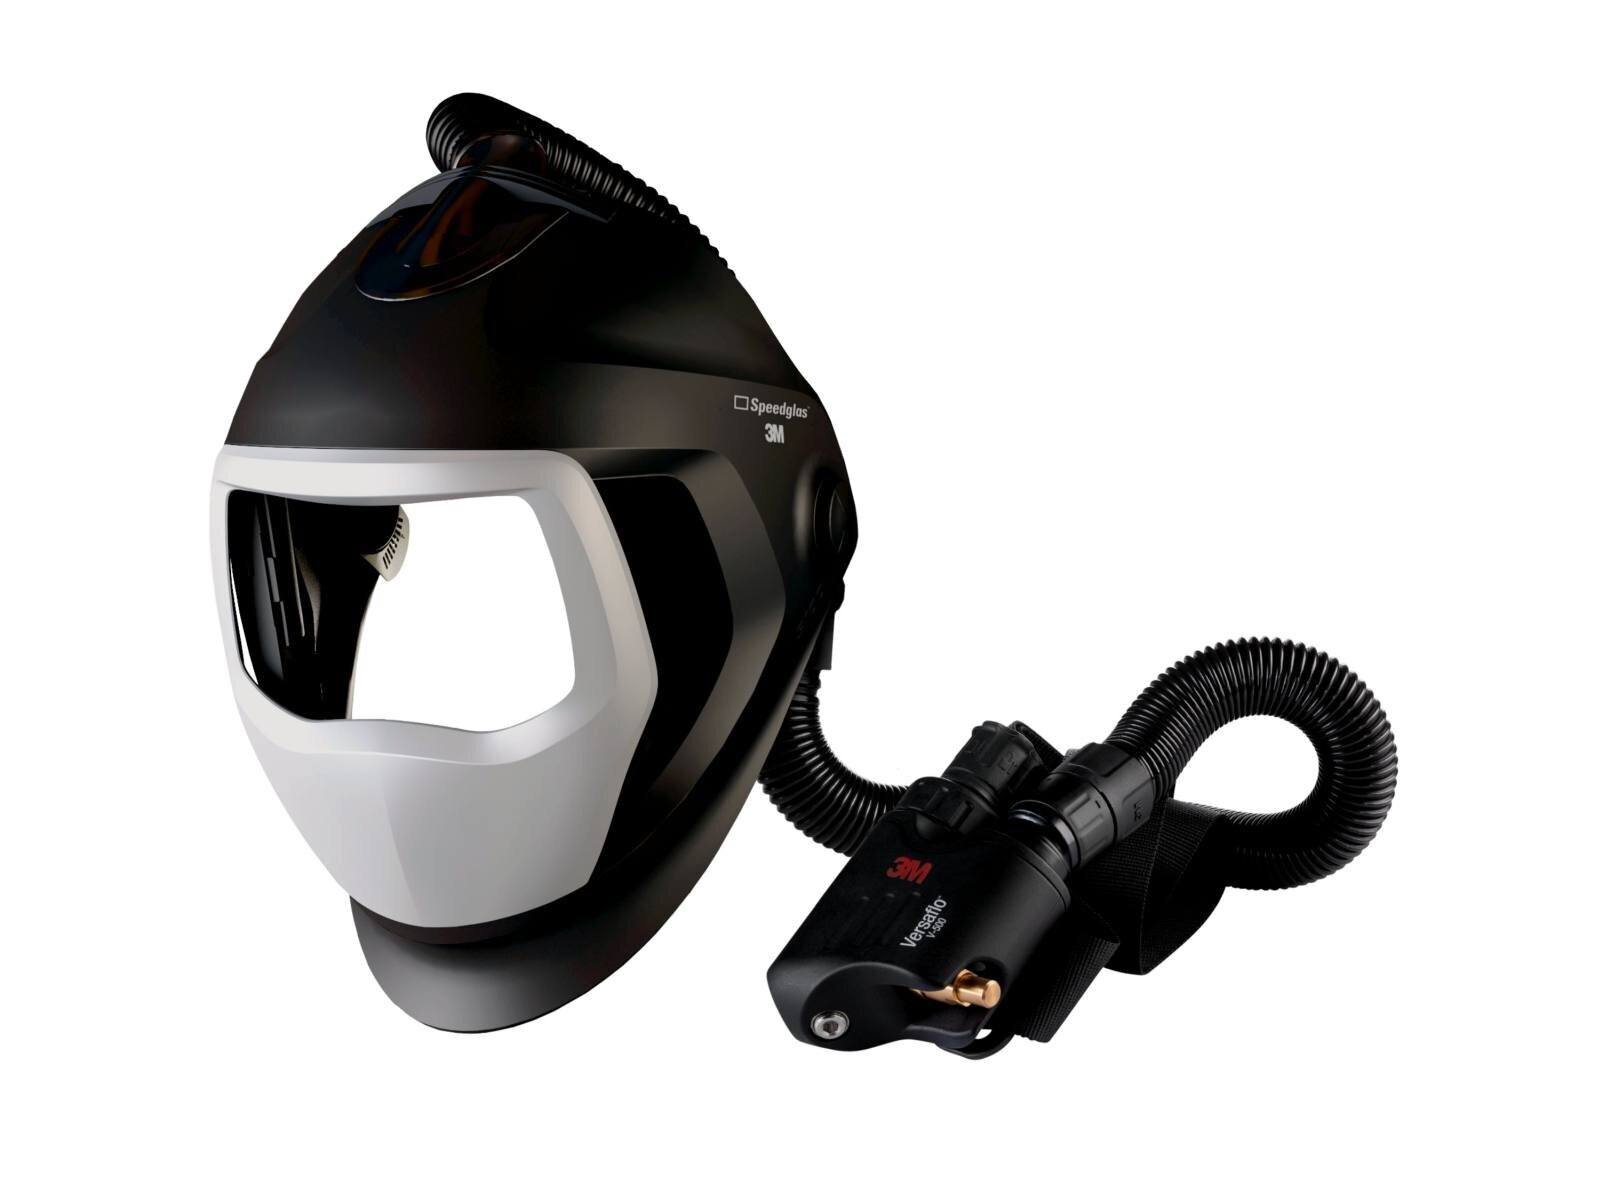 3M Speedglas 9100 Air welding mask without ADF, with Versaflo V-500E compressed air breathing protection, QRS air hose, 5333506 adapter, air flow meter, pre-filter, spark arrester, particle filter, lithium-ion battery and charger incl. storage bag #5